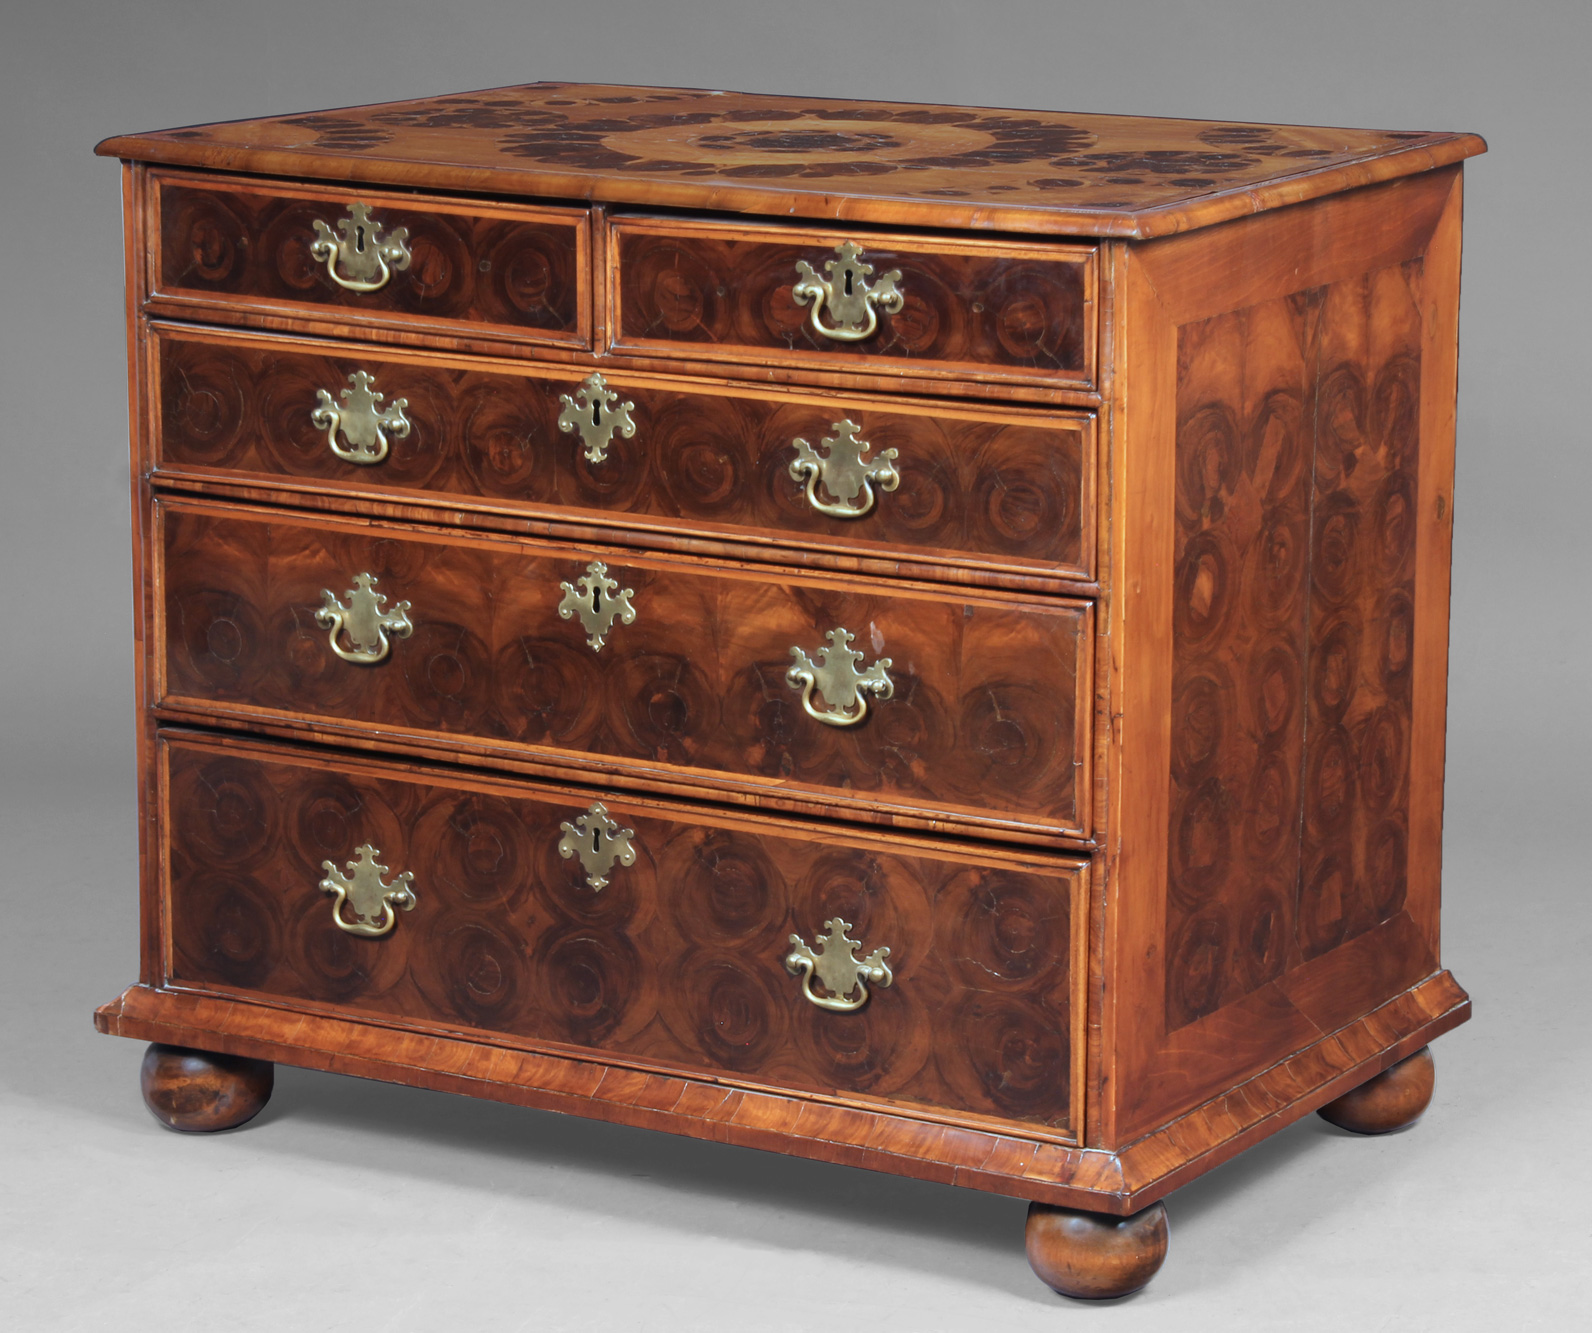  ANTIGUO 'CHEST OF DRAWERS' INGLES WILLIAM & MARY. 